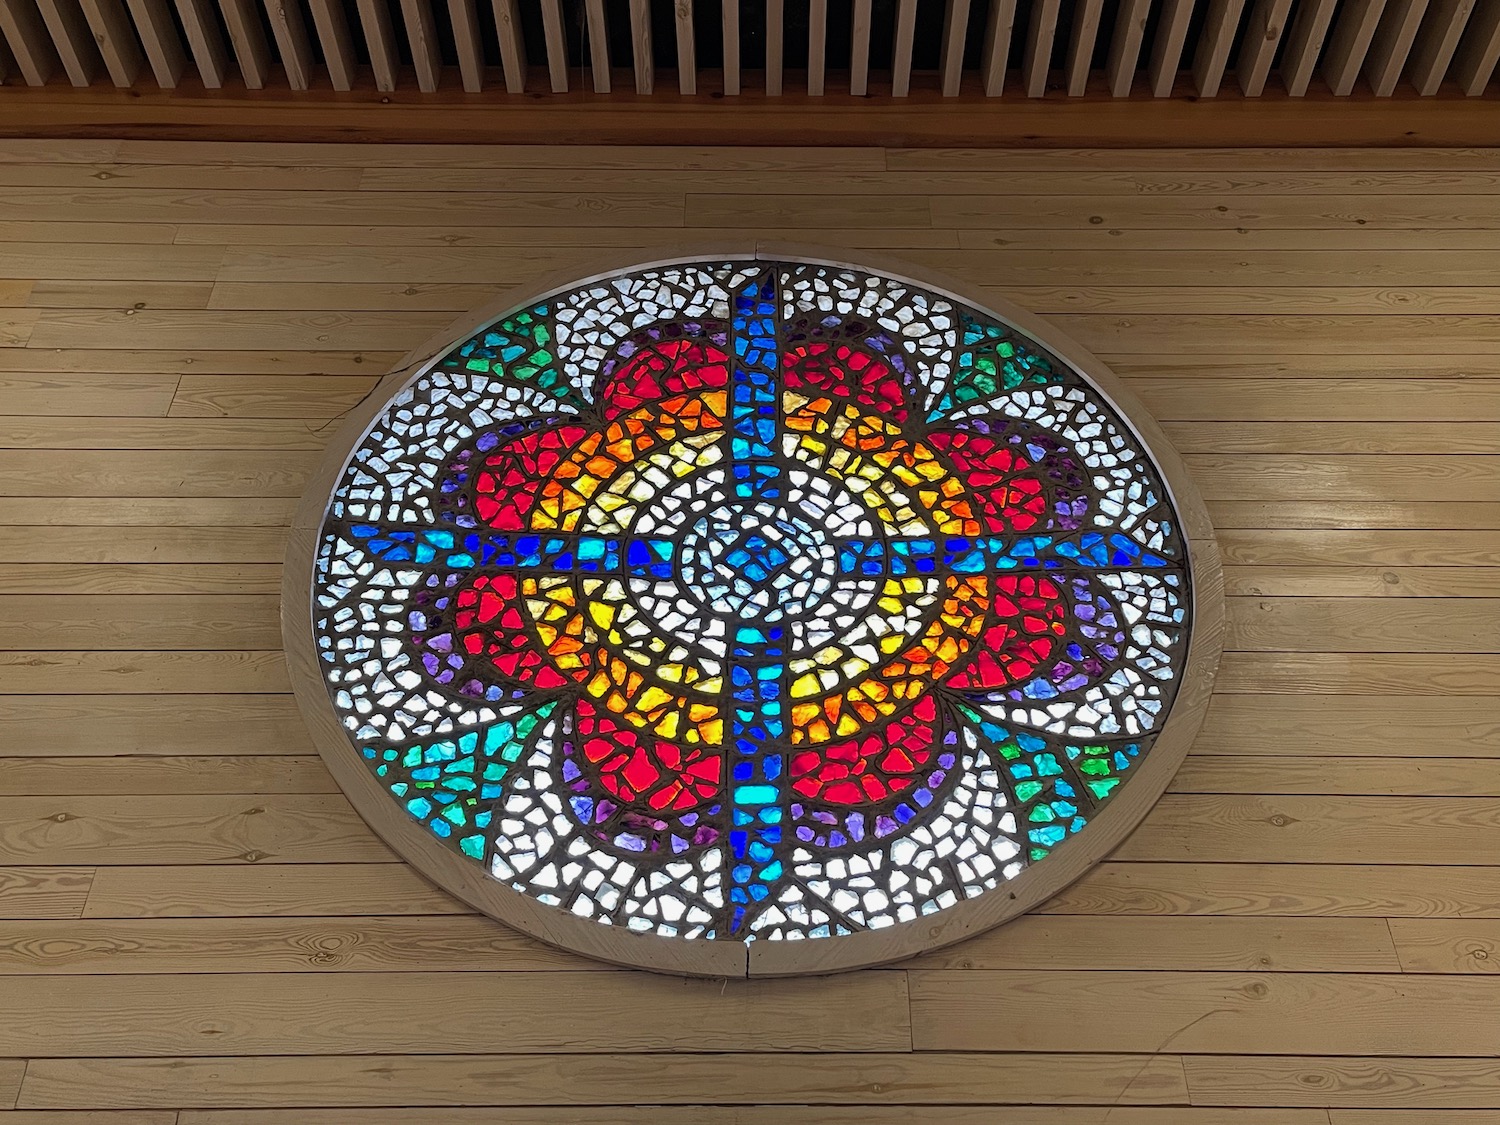 a circular stained glass window on a wood floor